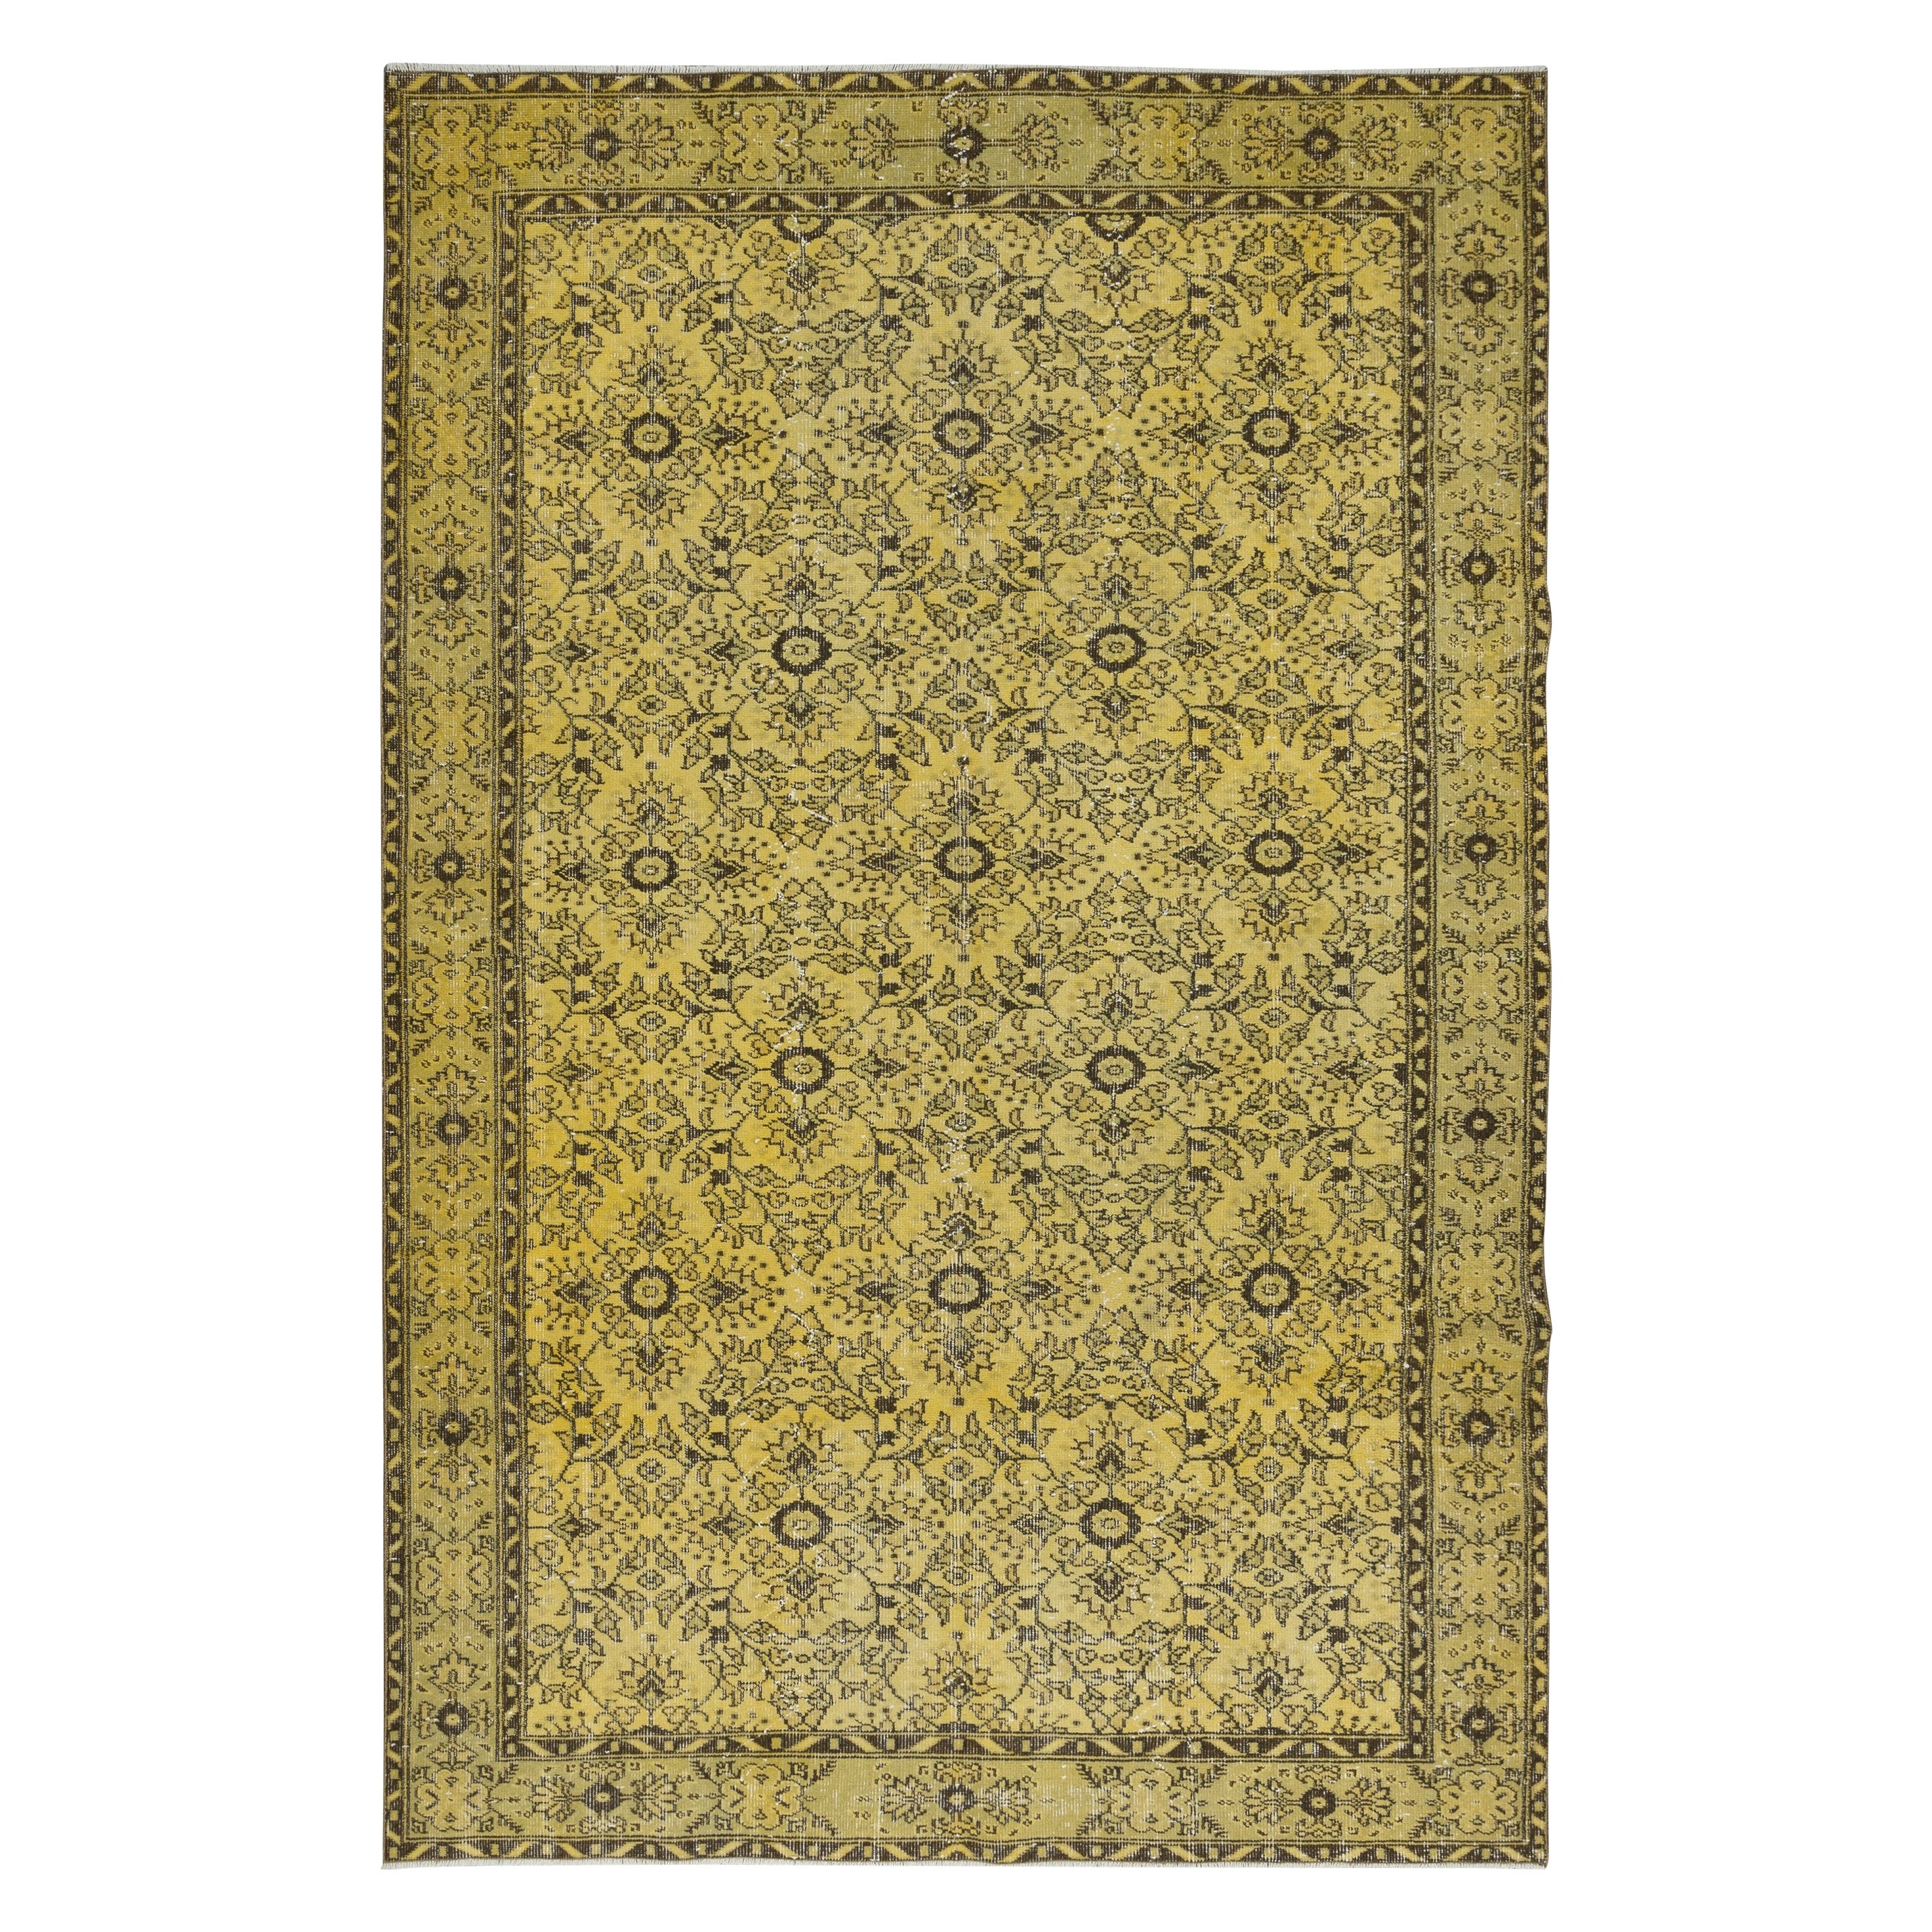 6.6x9.7 Ft Upcycled Yellow Modern Turkish Area Rug, Floral Handmade Carpet